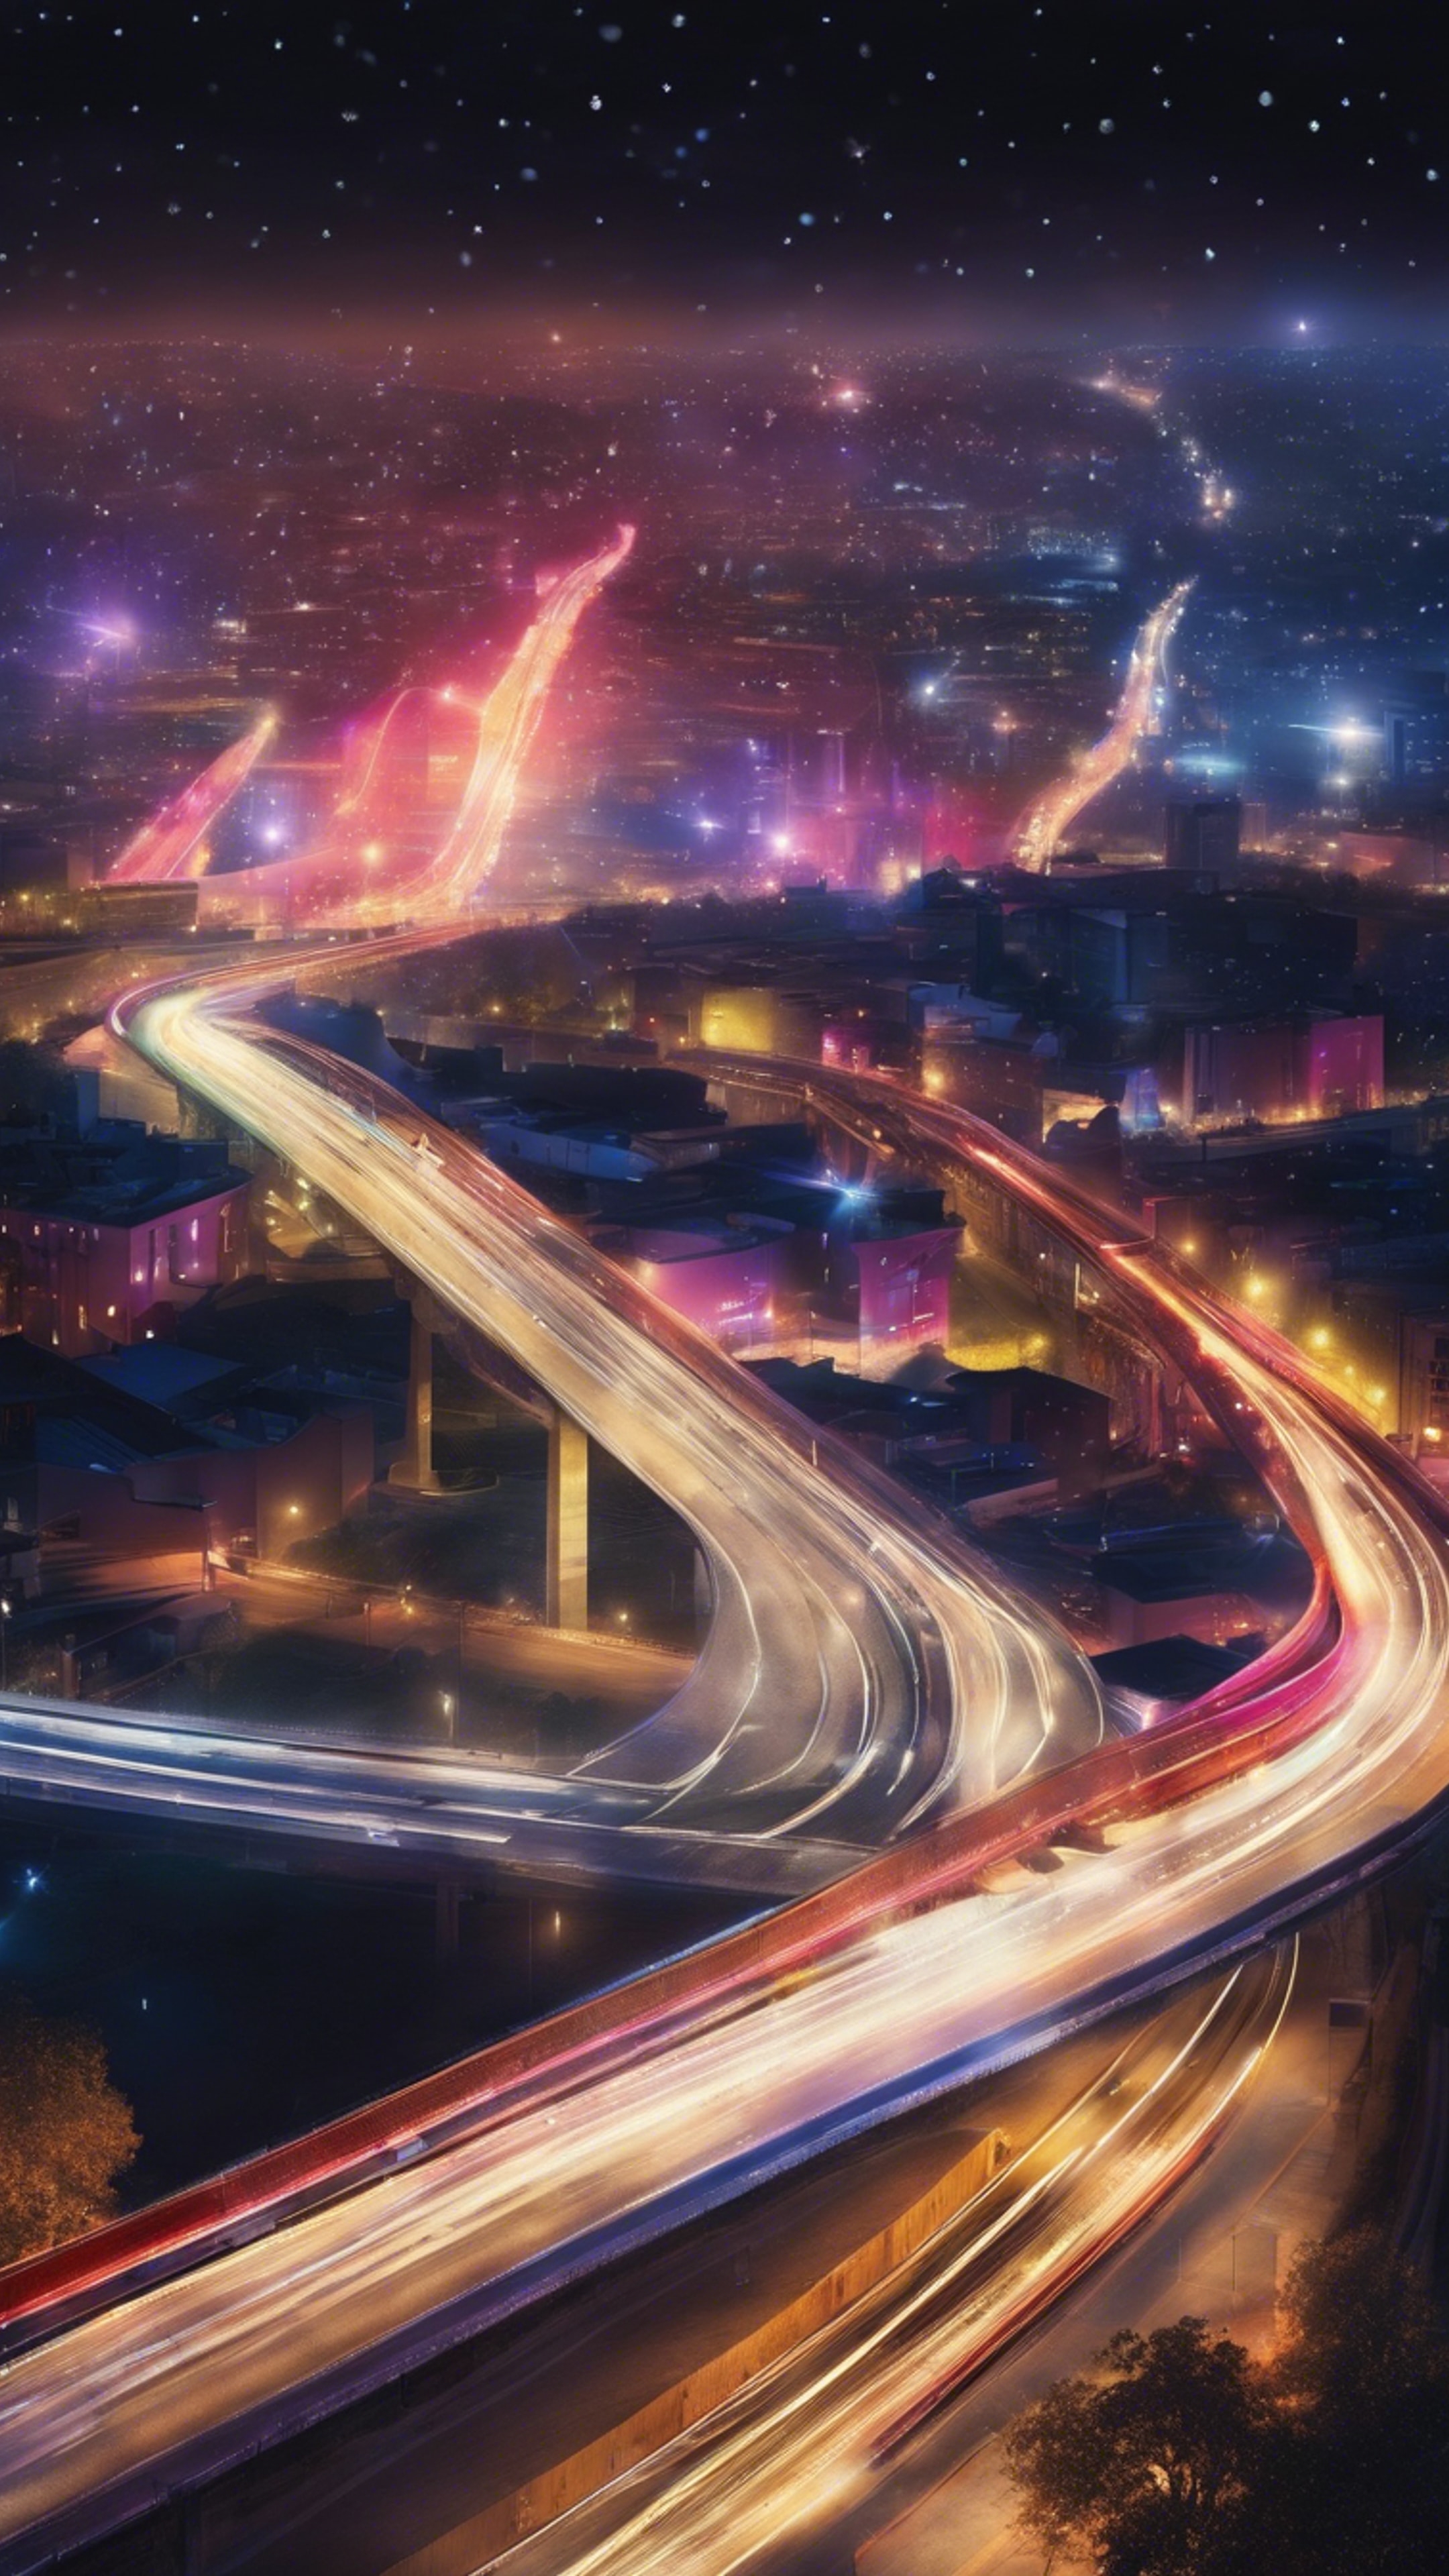 A lustrous highway painting a ribbon of light through the city under the vivid colors of a nocturnal sky. Обои[7f6125f7f59b411d957d]